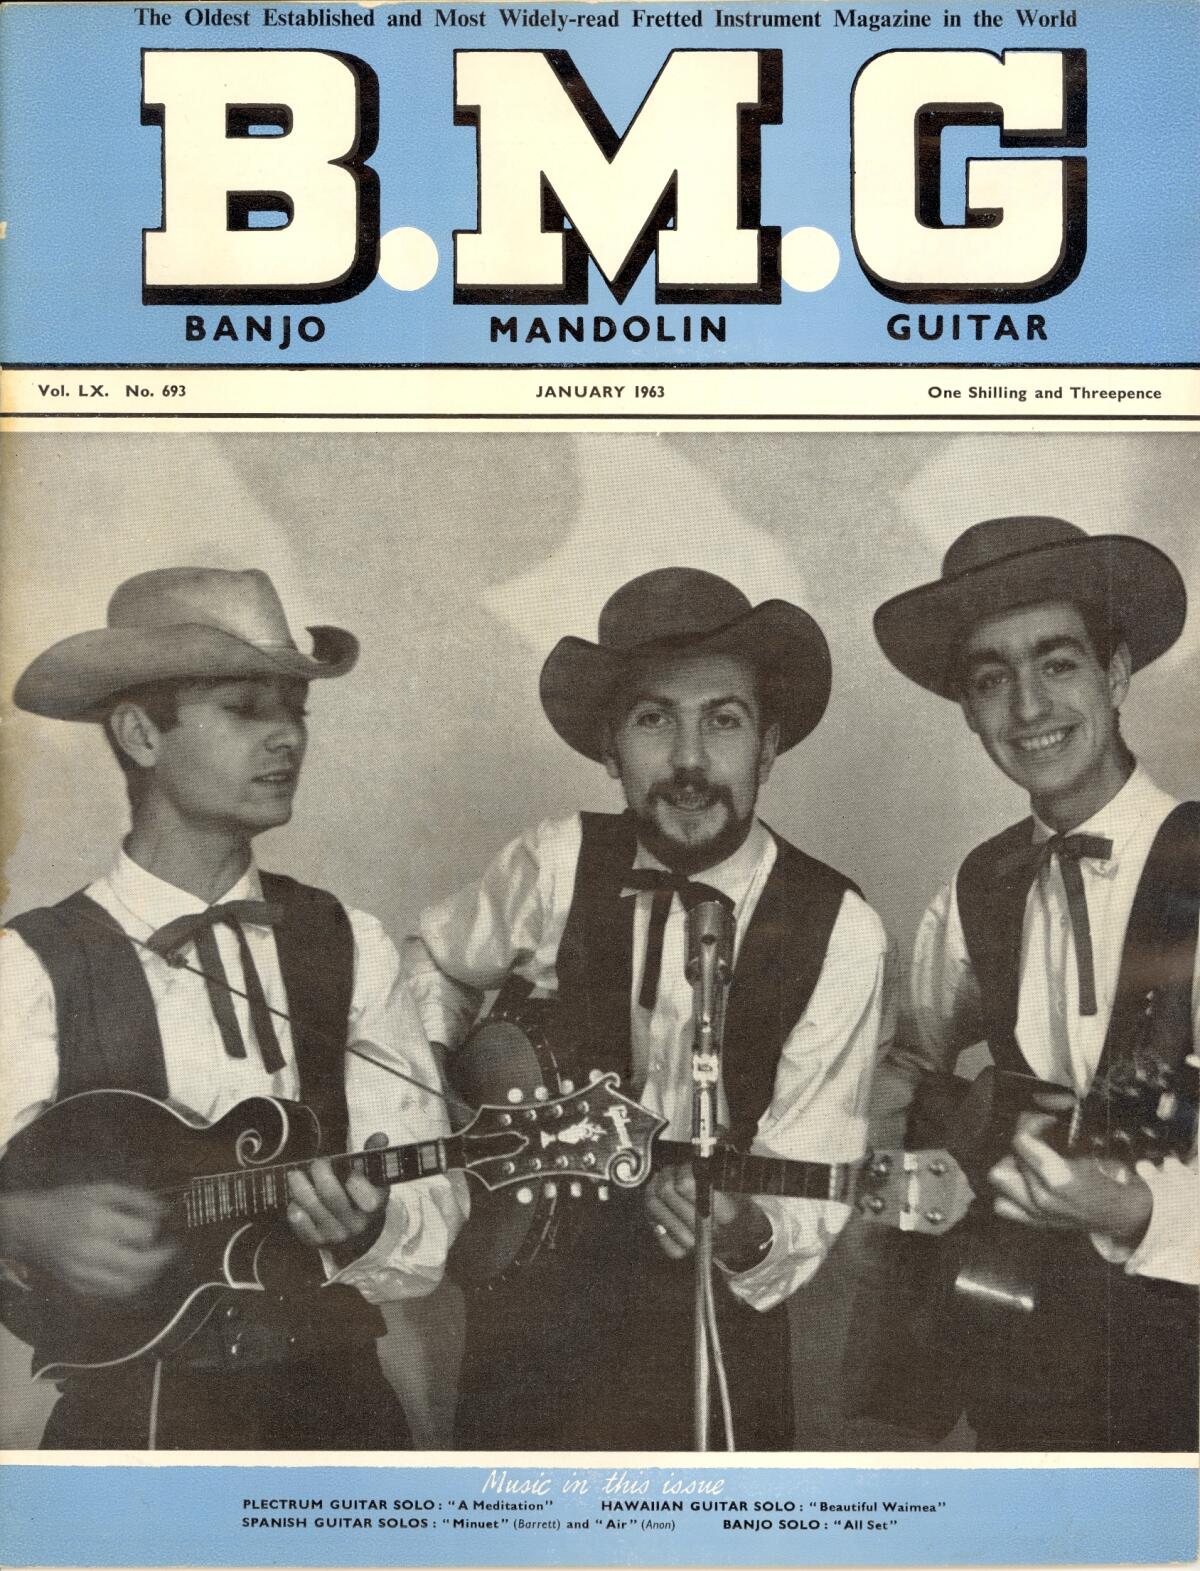 An old magazine cover shows three men in vests, Southern bow ties and cowboy hats holding various  instruments